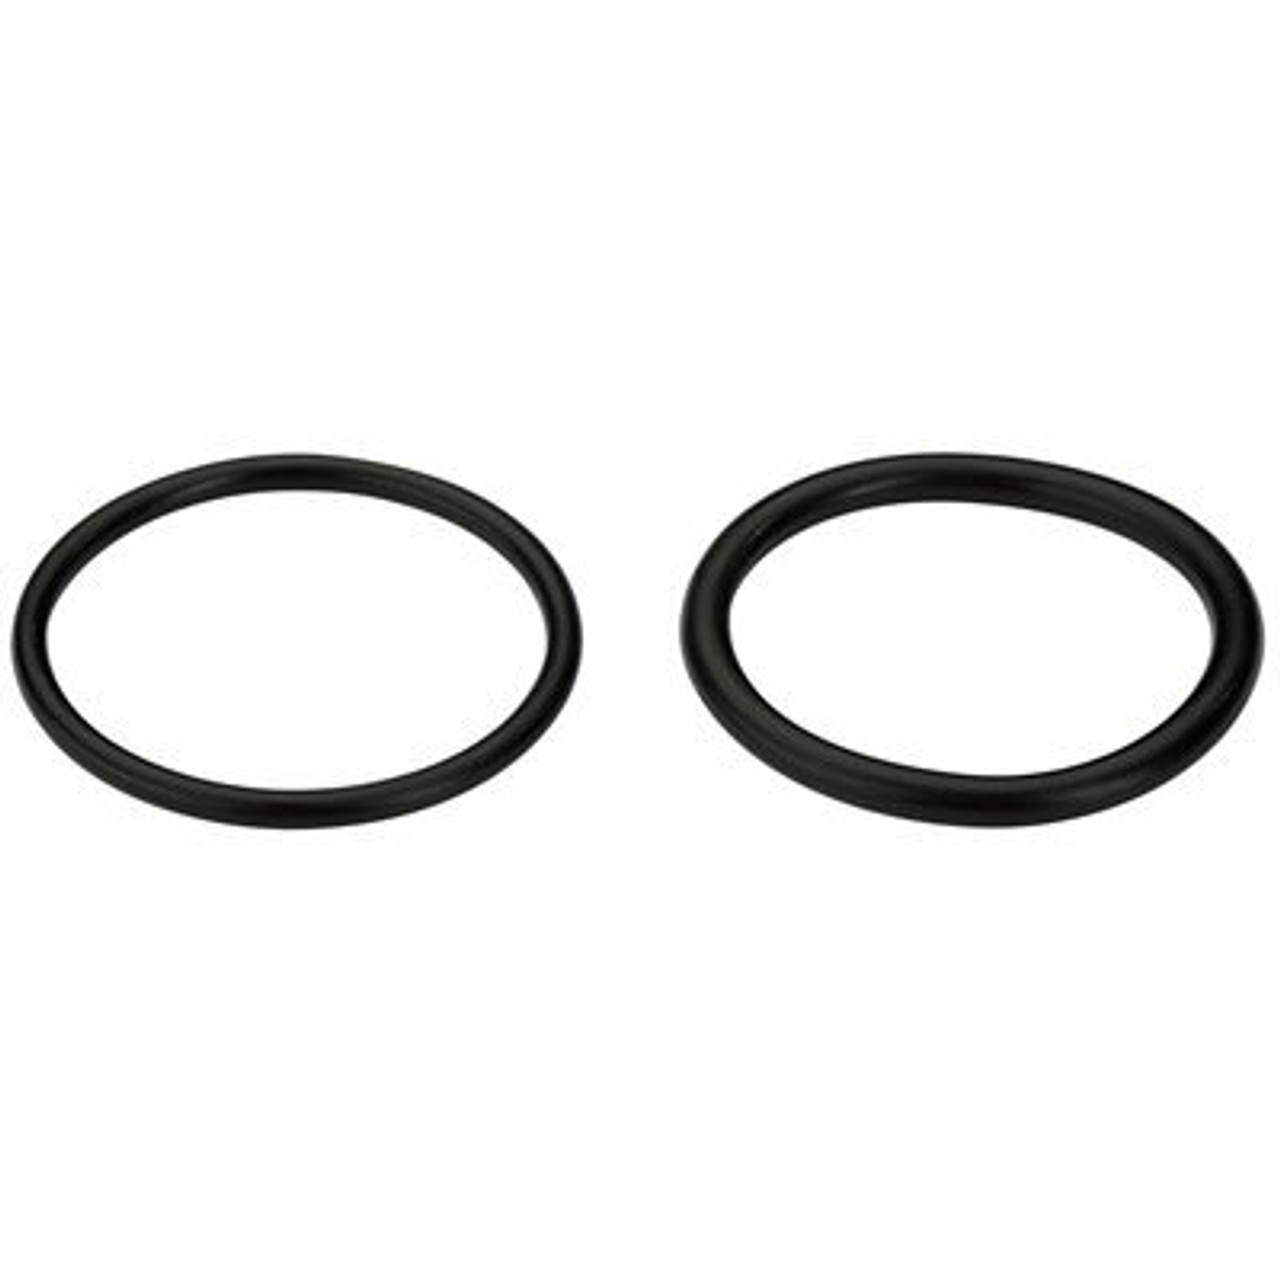 Pfister Spout O-Ring For 34 Series Kitchen Faucet